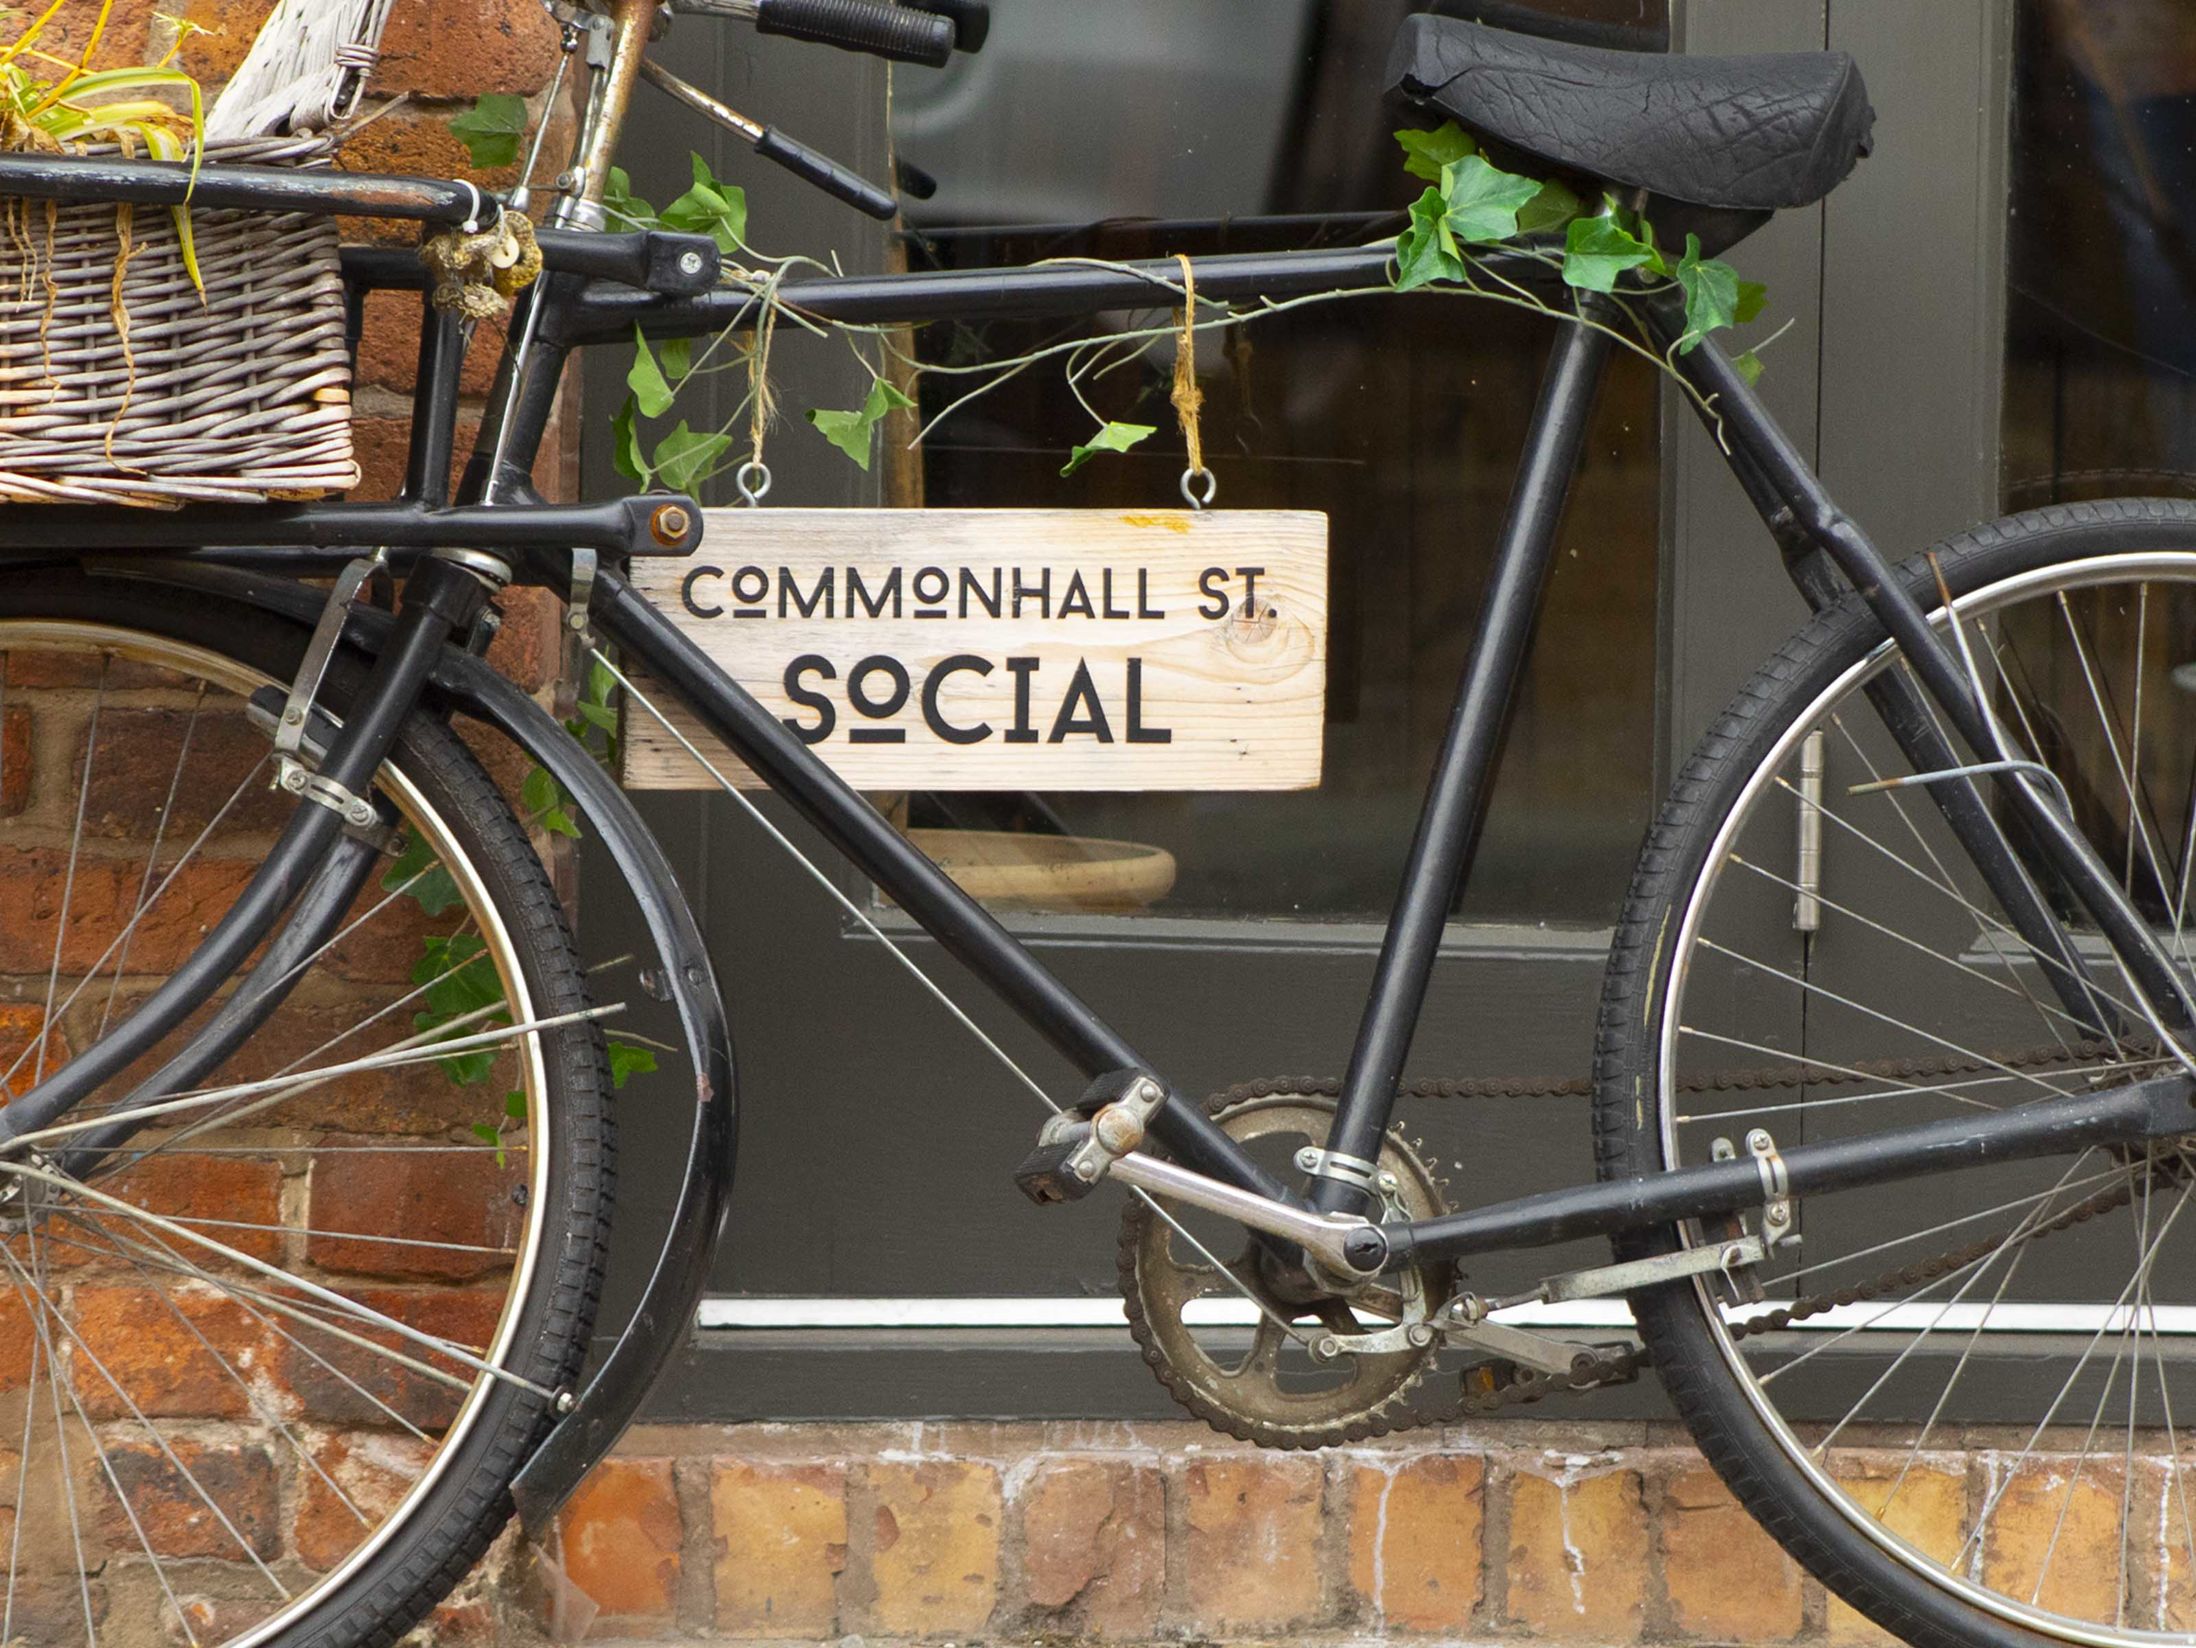 Commonhall Street Social - Best Real Ale Pubs in Chester